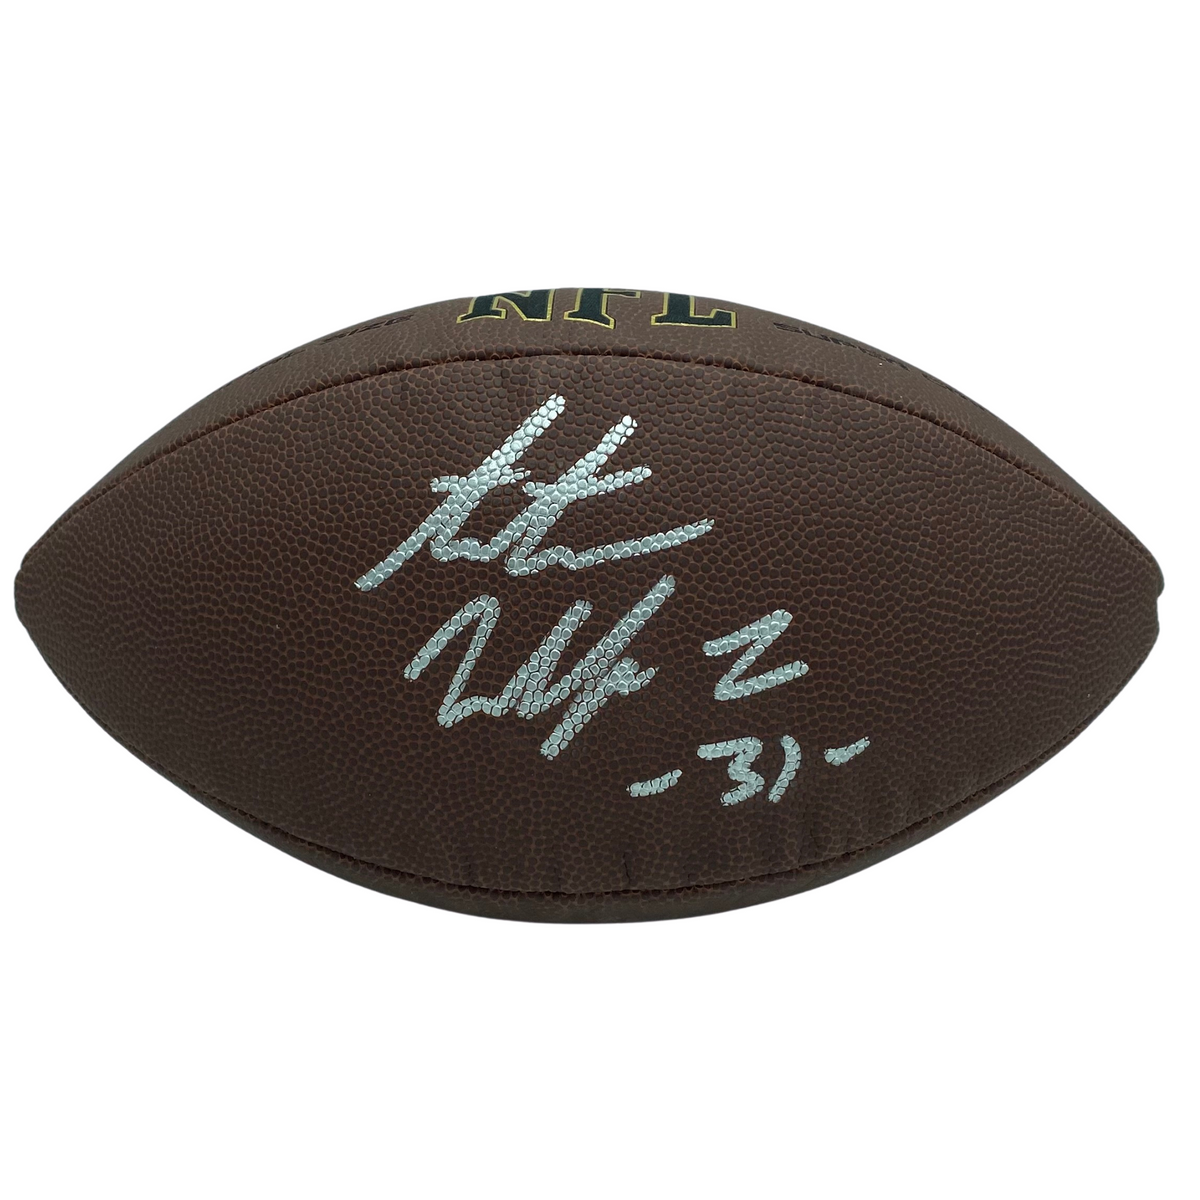 Pin on NFL Autographed Items